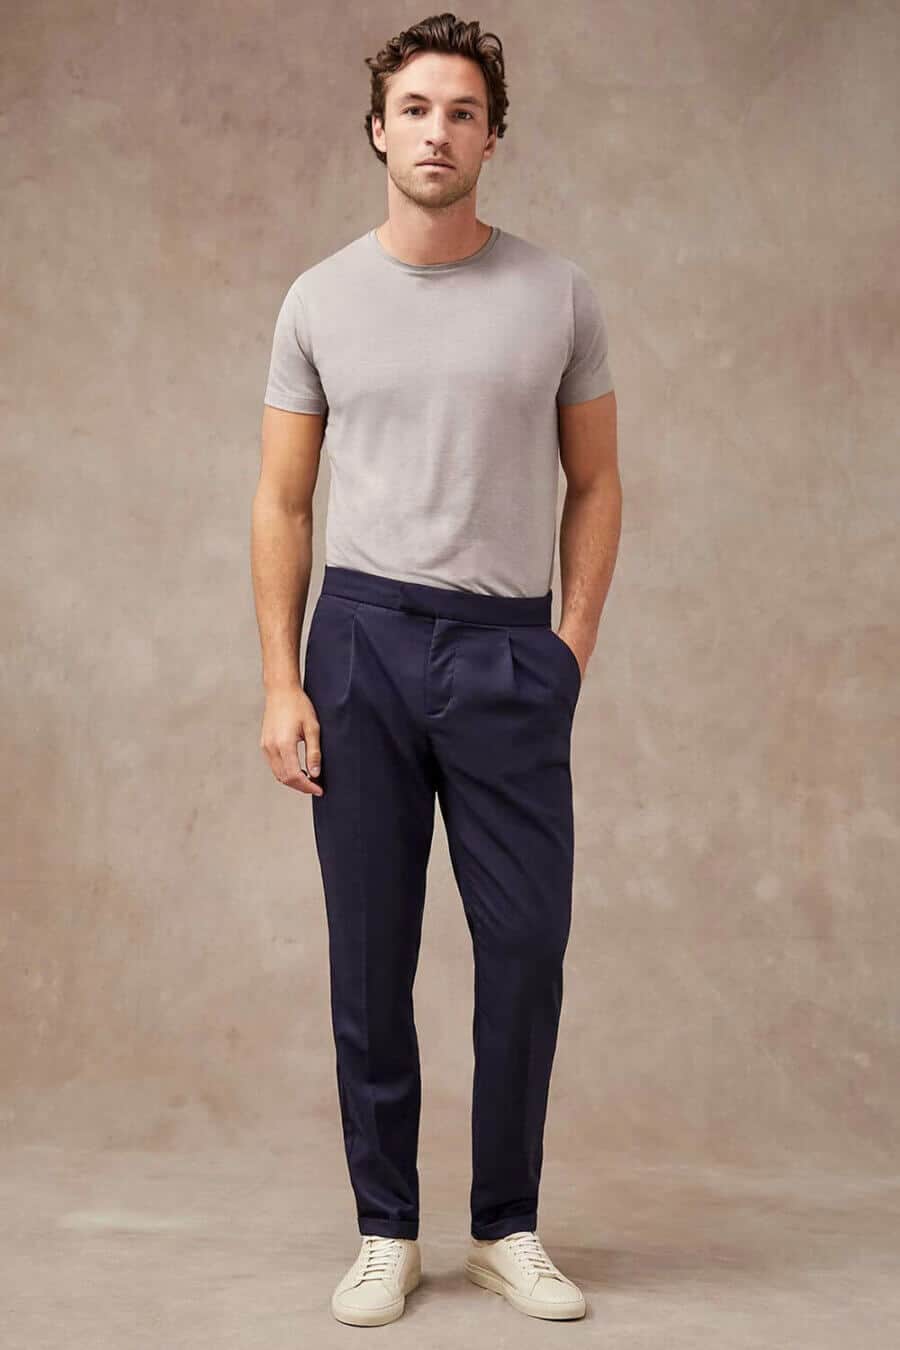 Men's navy pleated pants, tucked in grey T-shirt and white sneakers outfit